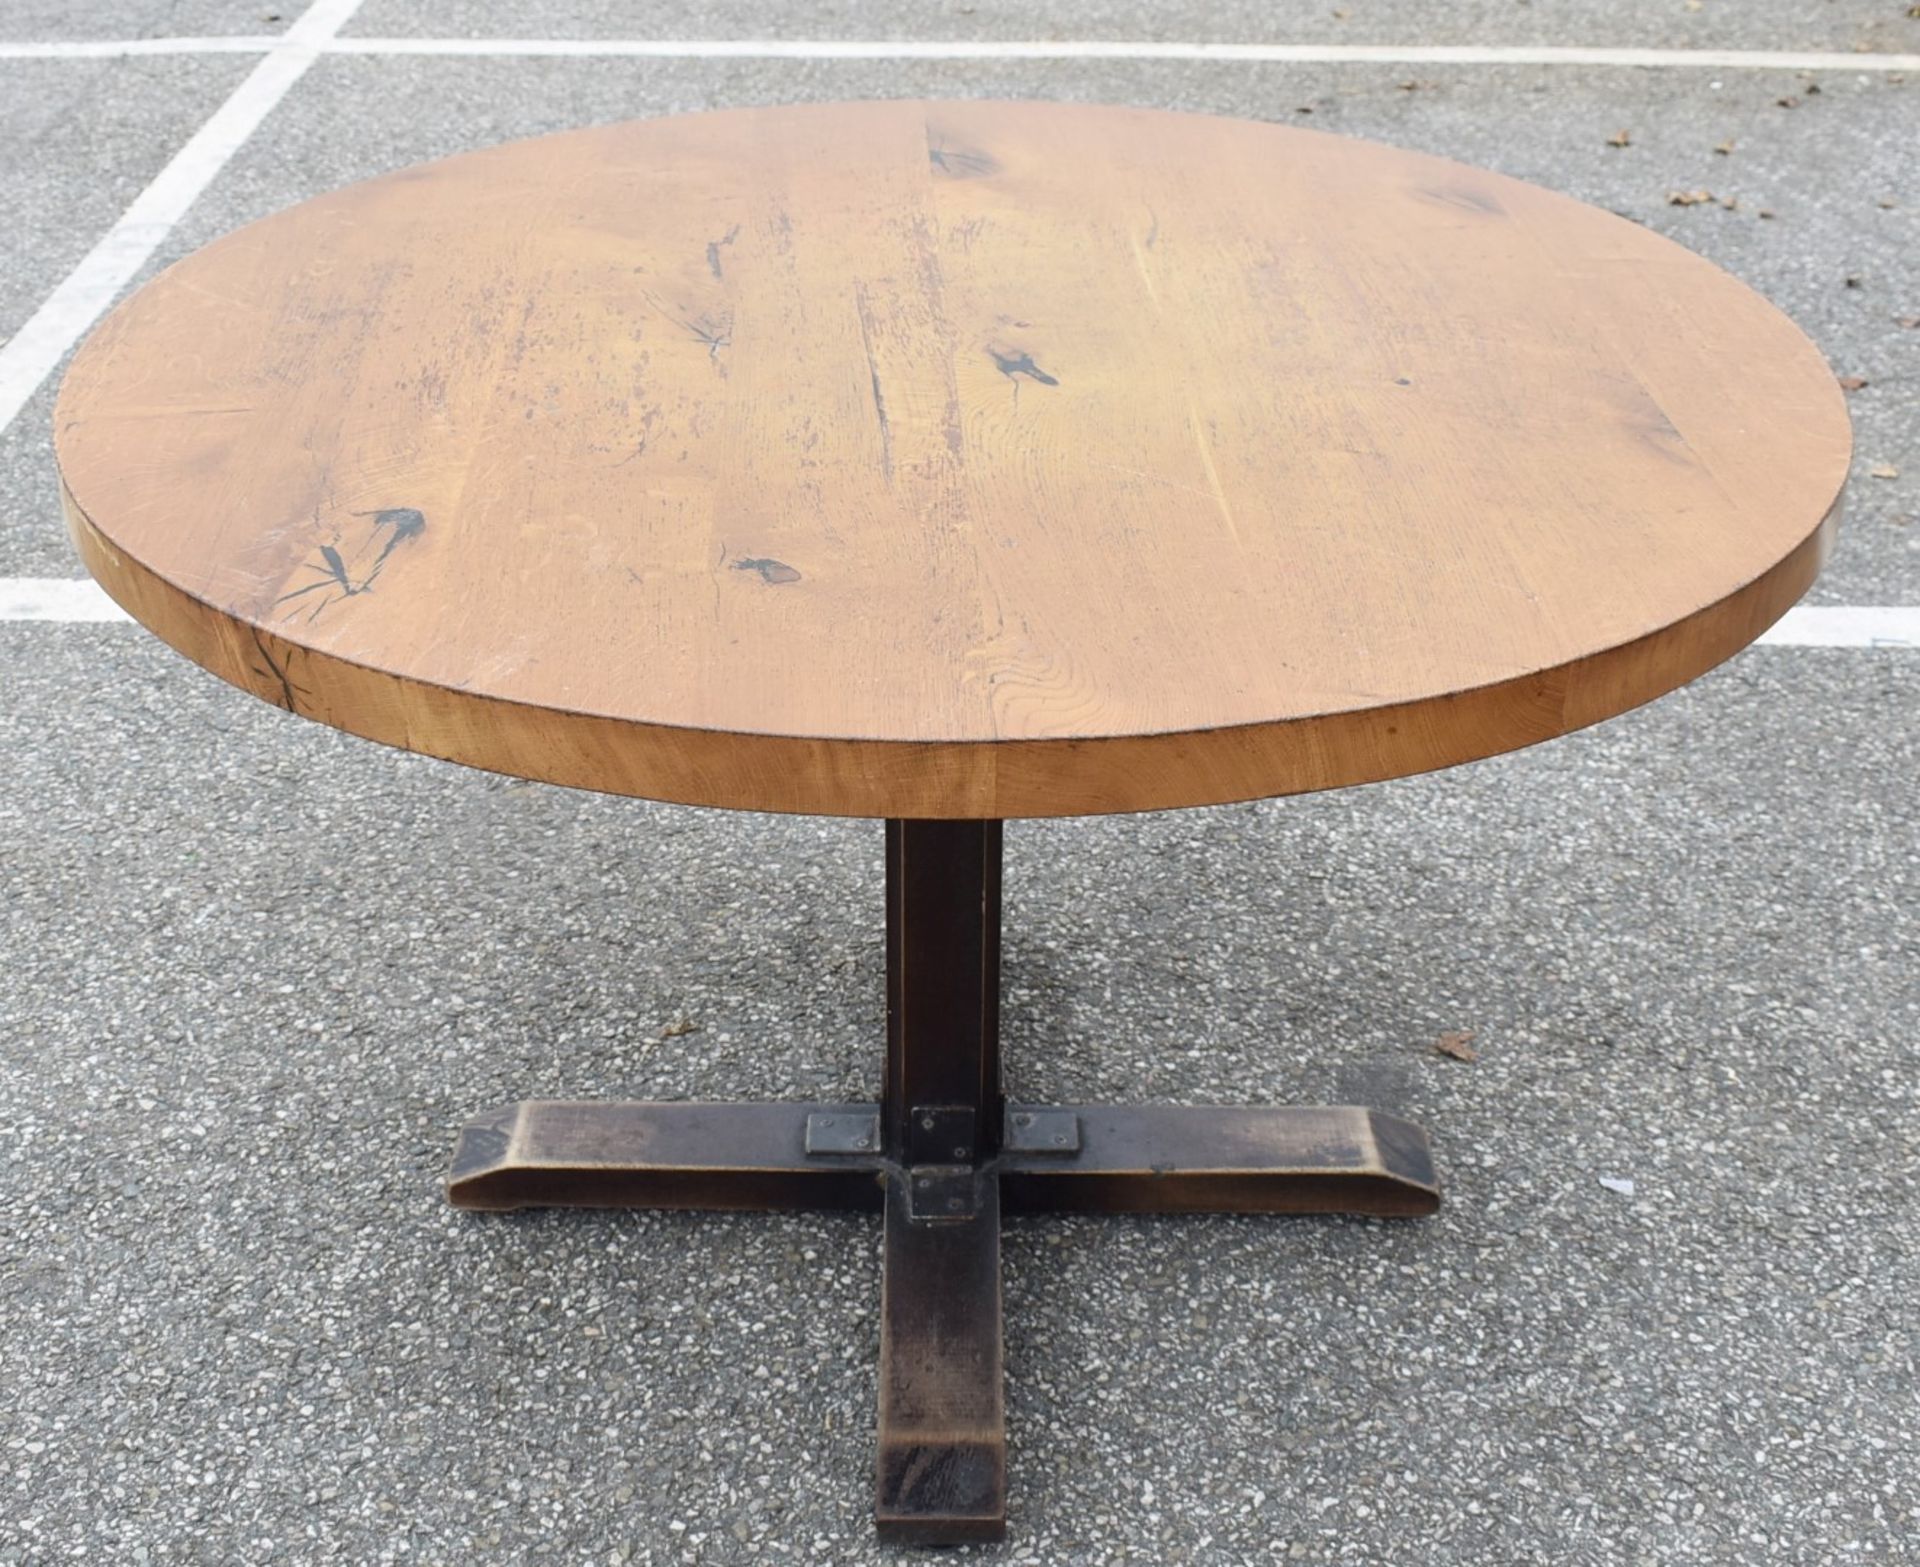 1 x Solid Oak 120cm Round Restaurant Table - Natural Rustic Knotty Oak Tops With Rustic Timber Base - Image 6 of 6